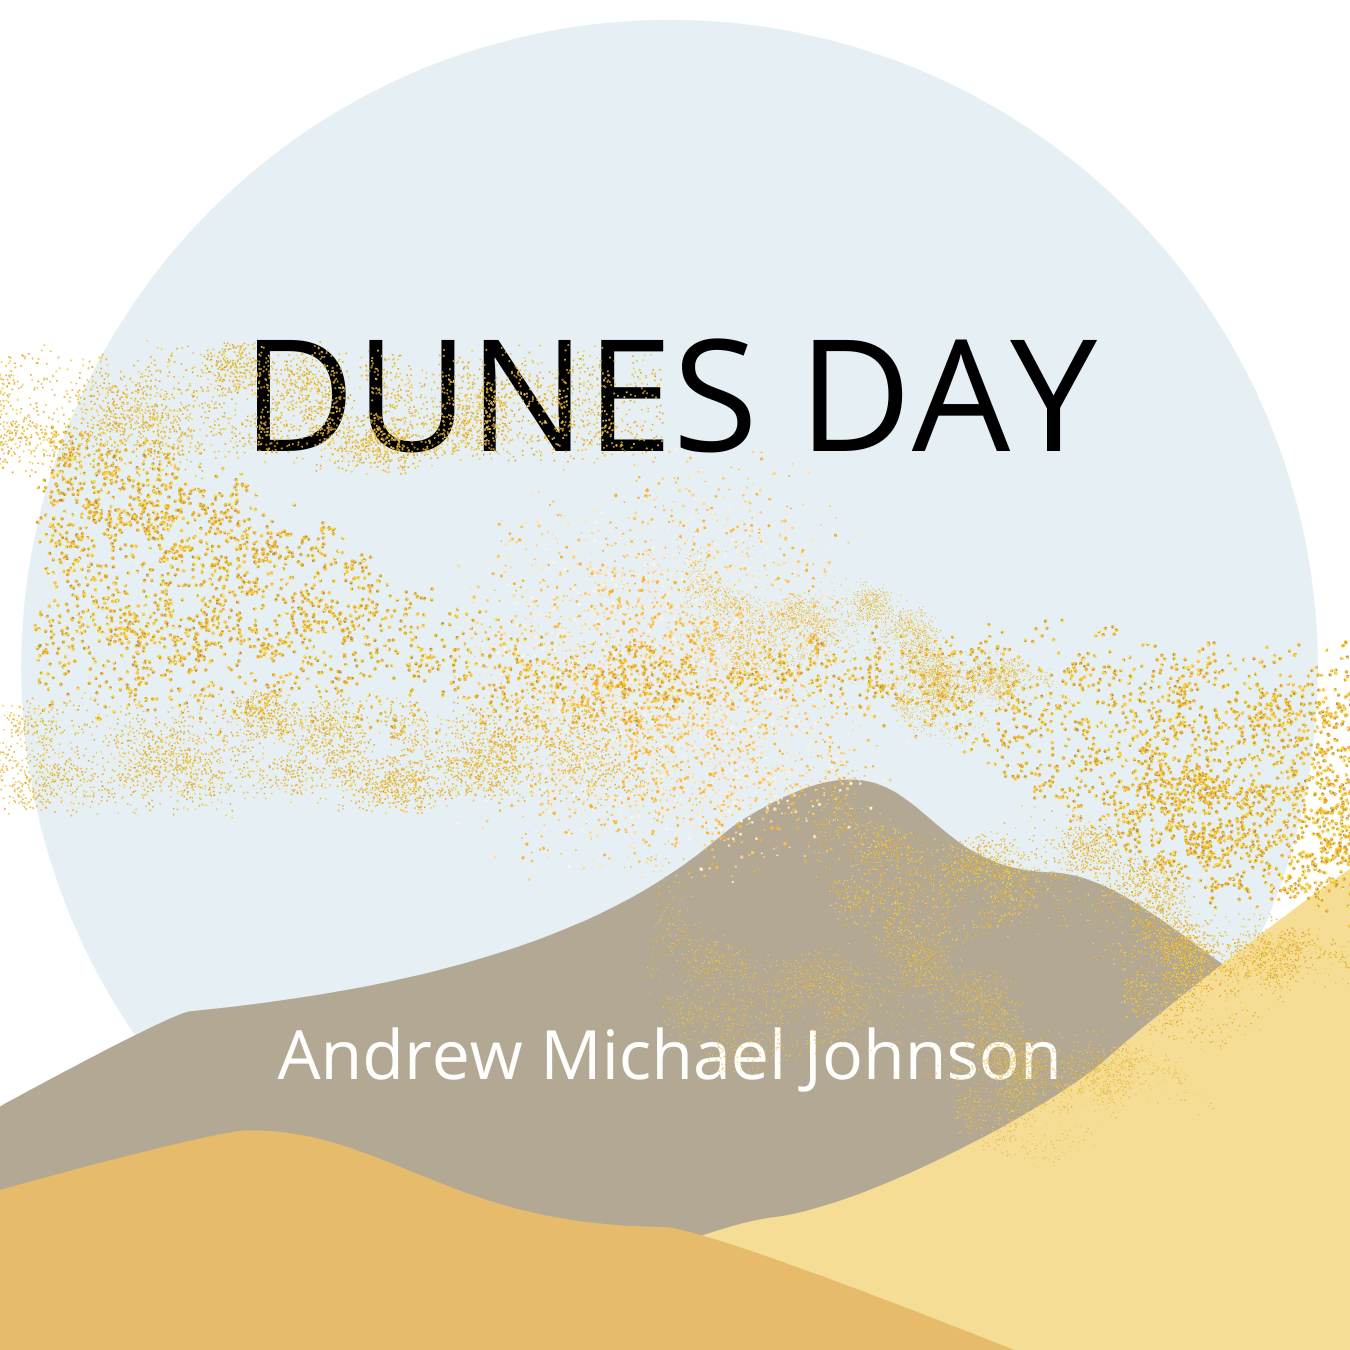 DUNES DAY by Andrew Michael Johnson